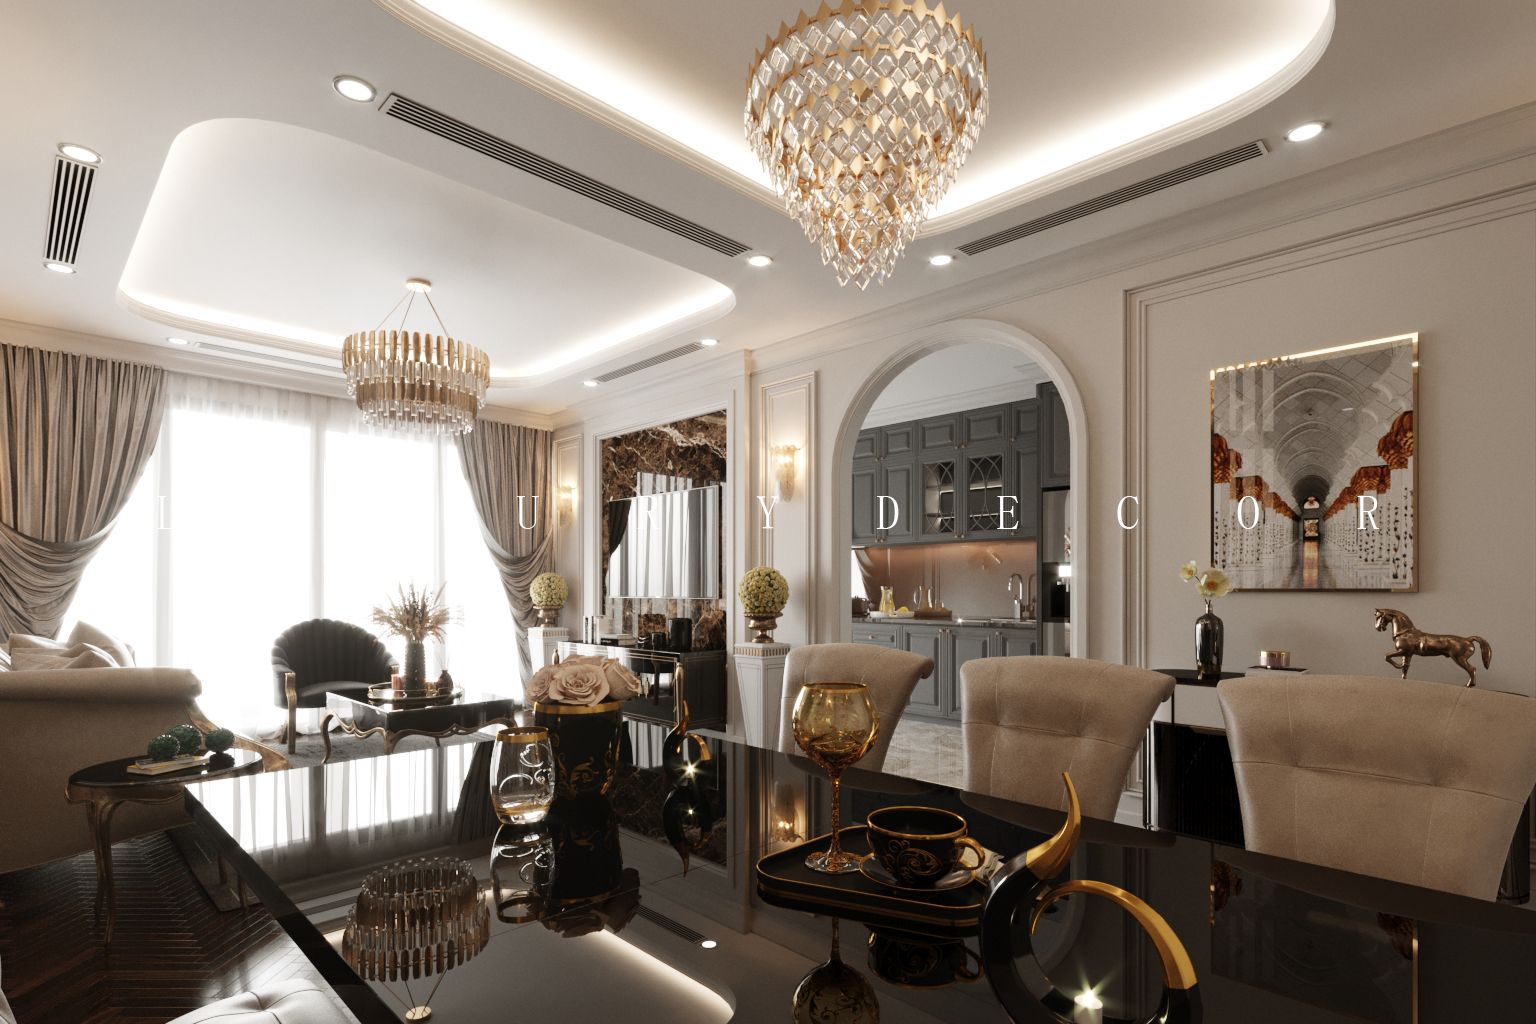 Top 99 luxury decor home Design tips for creating a luxurious decor home